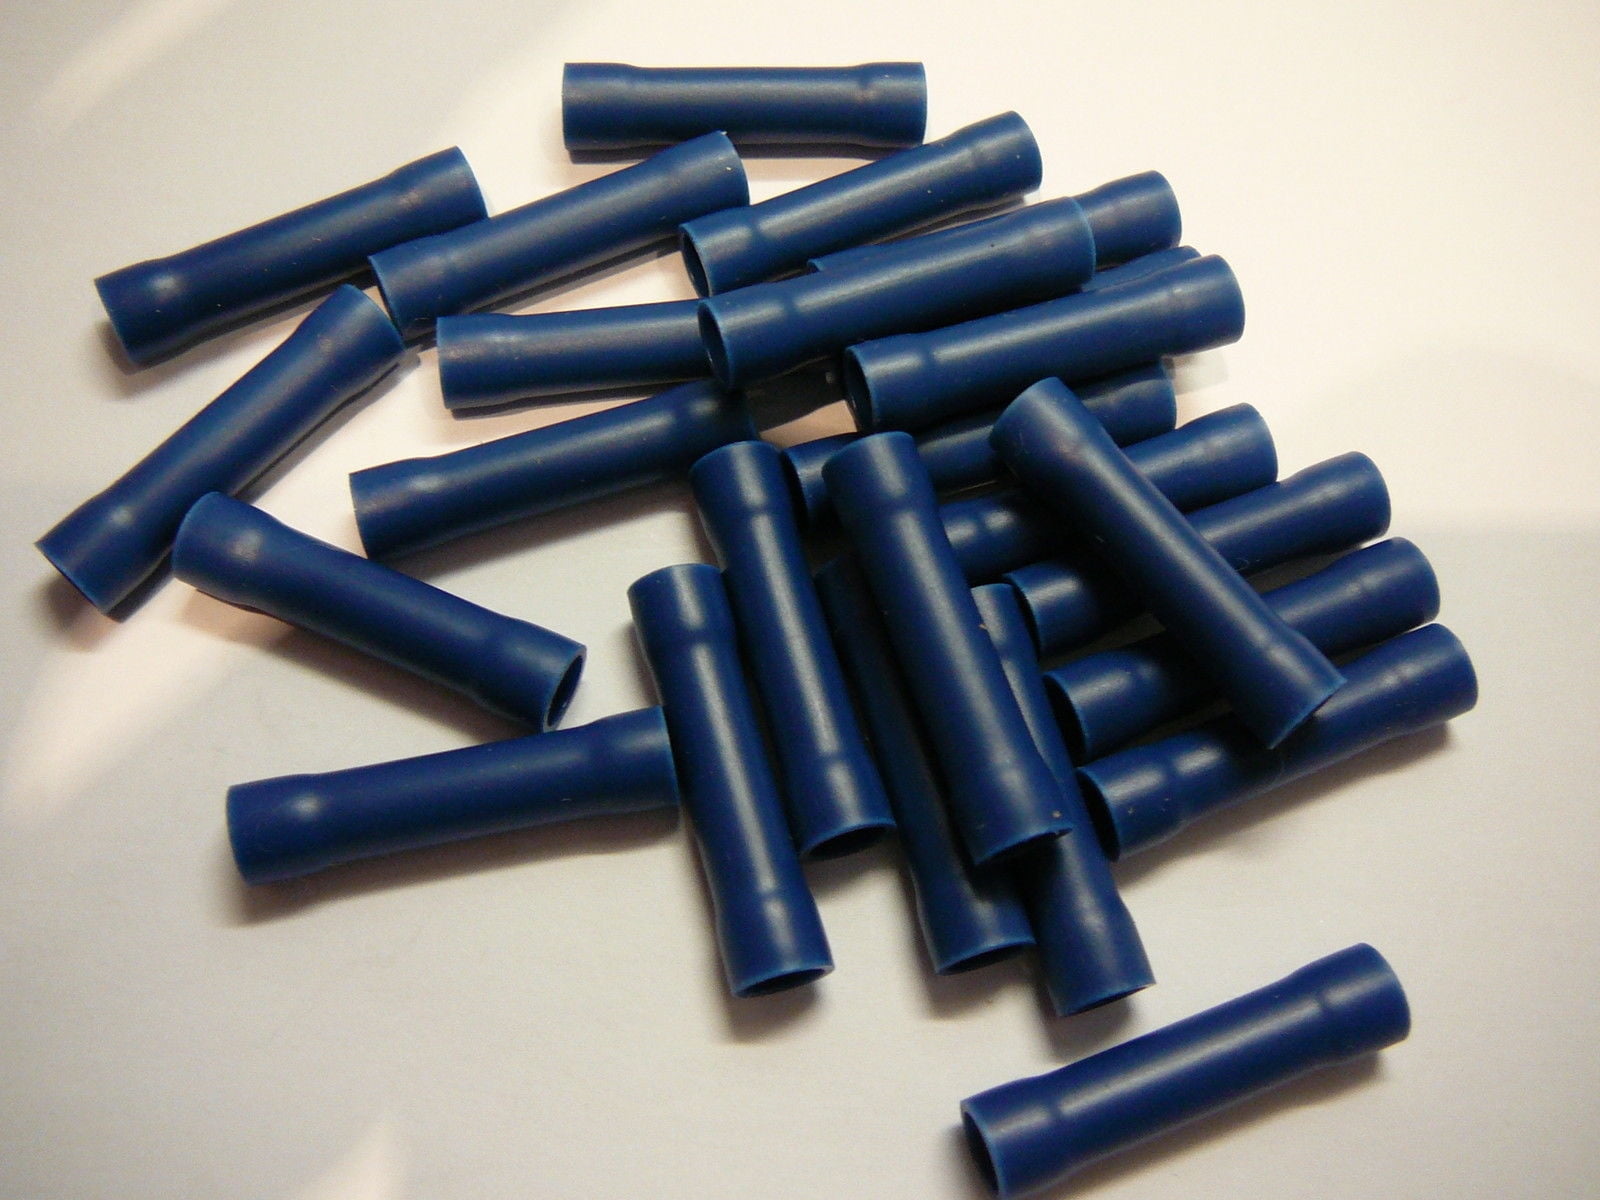 BLUE VINYL BUTT CRIMP TERMINAL INSULATED SPLICE WIRE CONNECTORS 16-14AWG